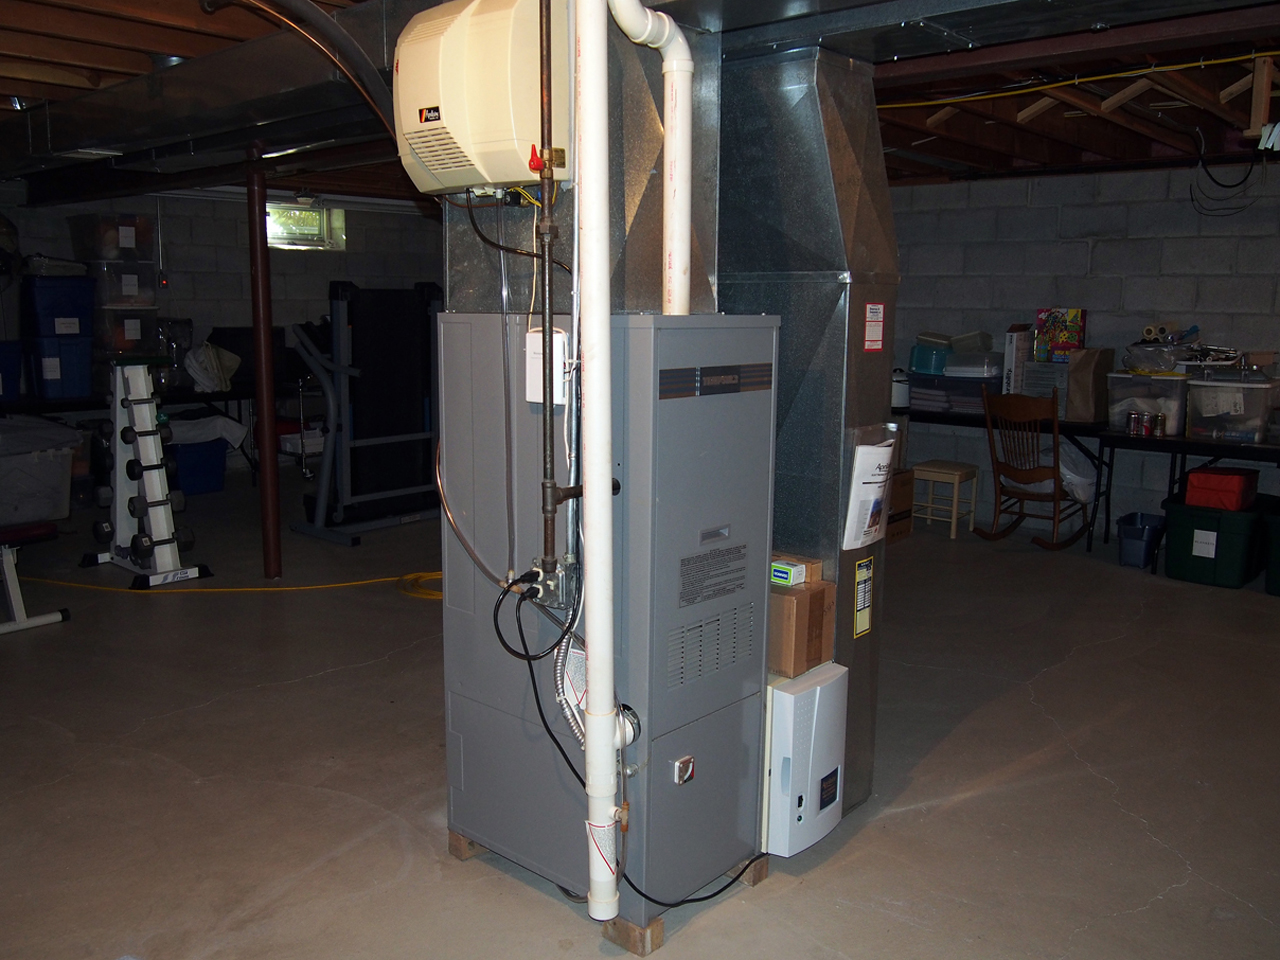 Original Tempstar Furnace Installed When The House Was Built